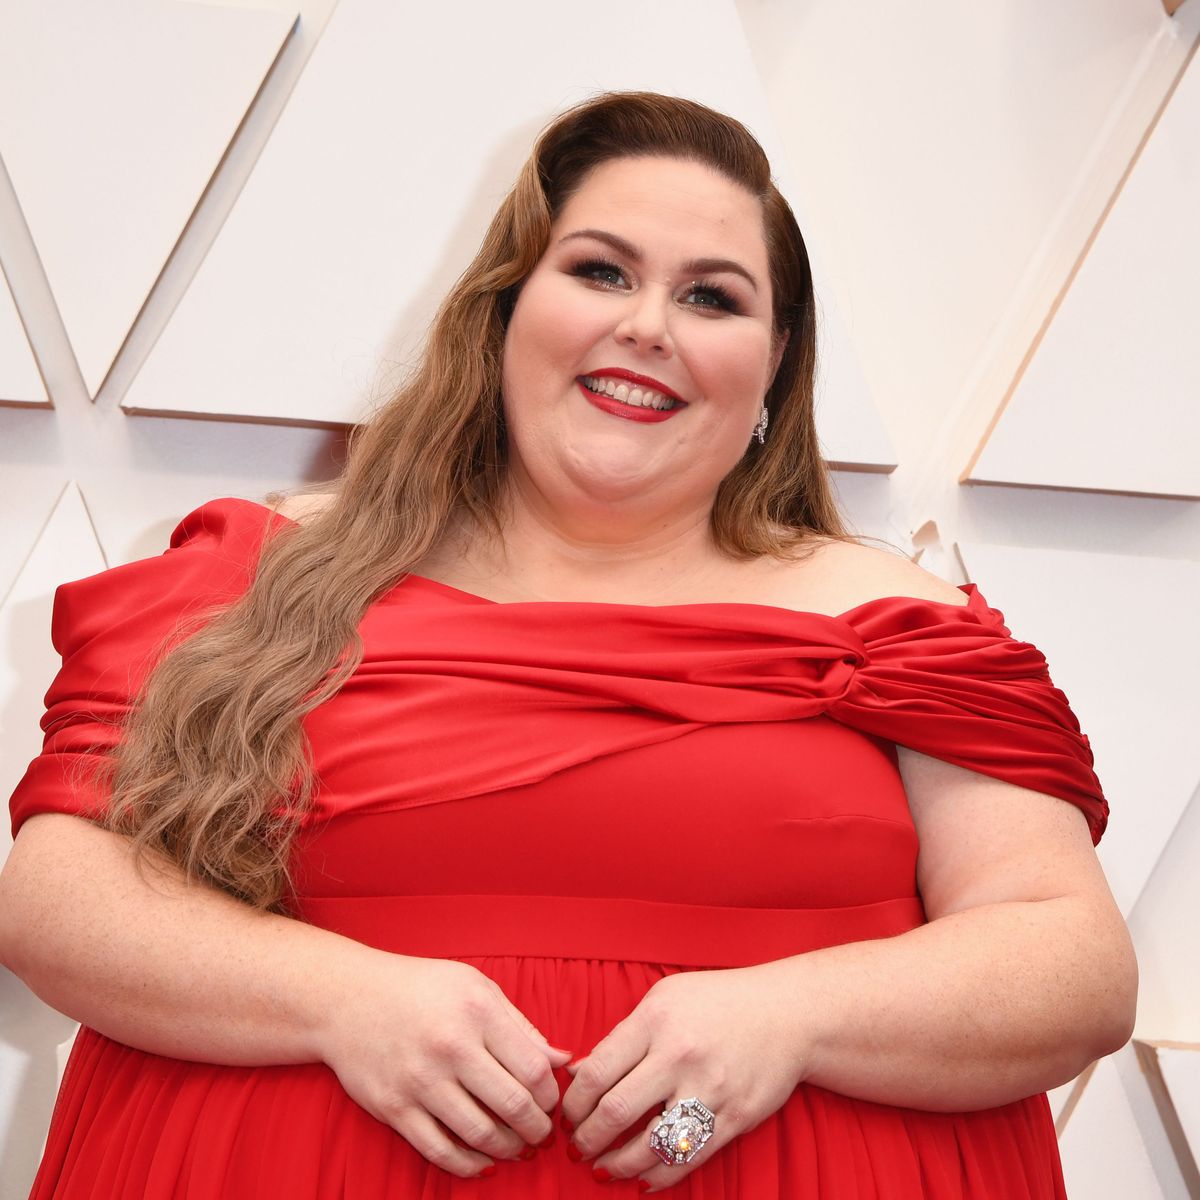 Chubby Japanese Forc Fuck - Chrissy Metz's Weight-Loss Journey: Everything She's Revealed